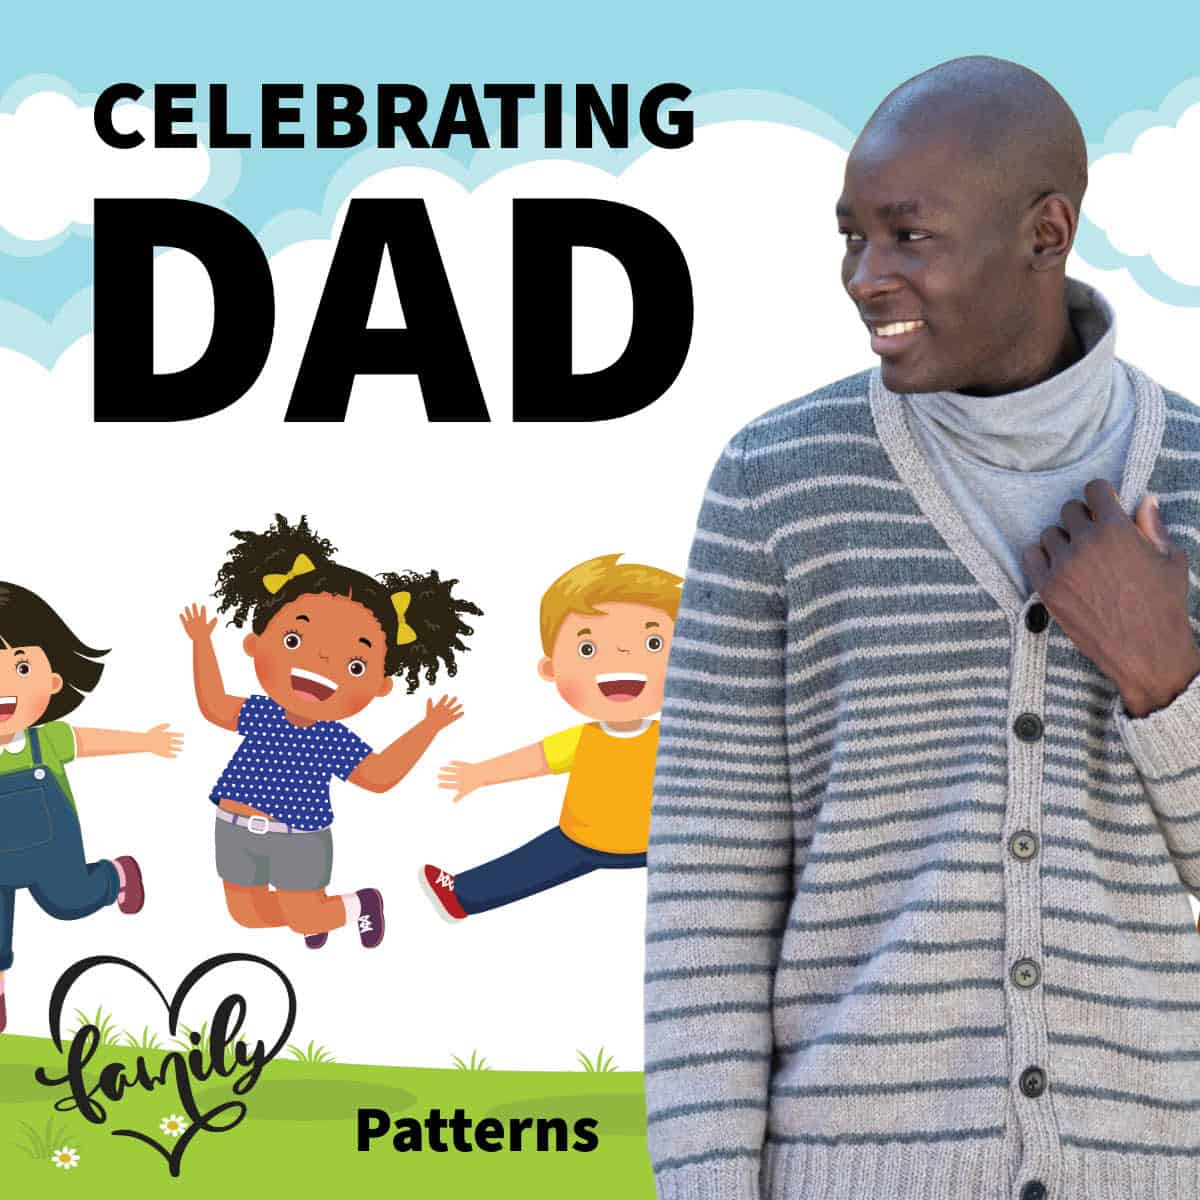 Celebrating Dad with Handmade Crochet and Knit Free Patterns